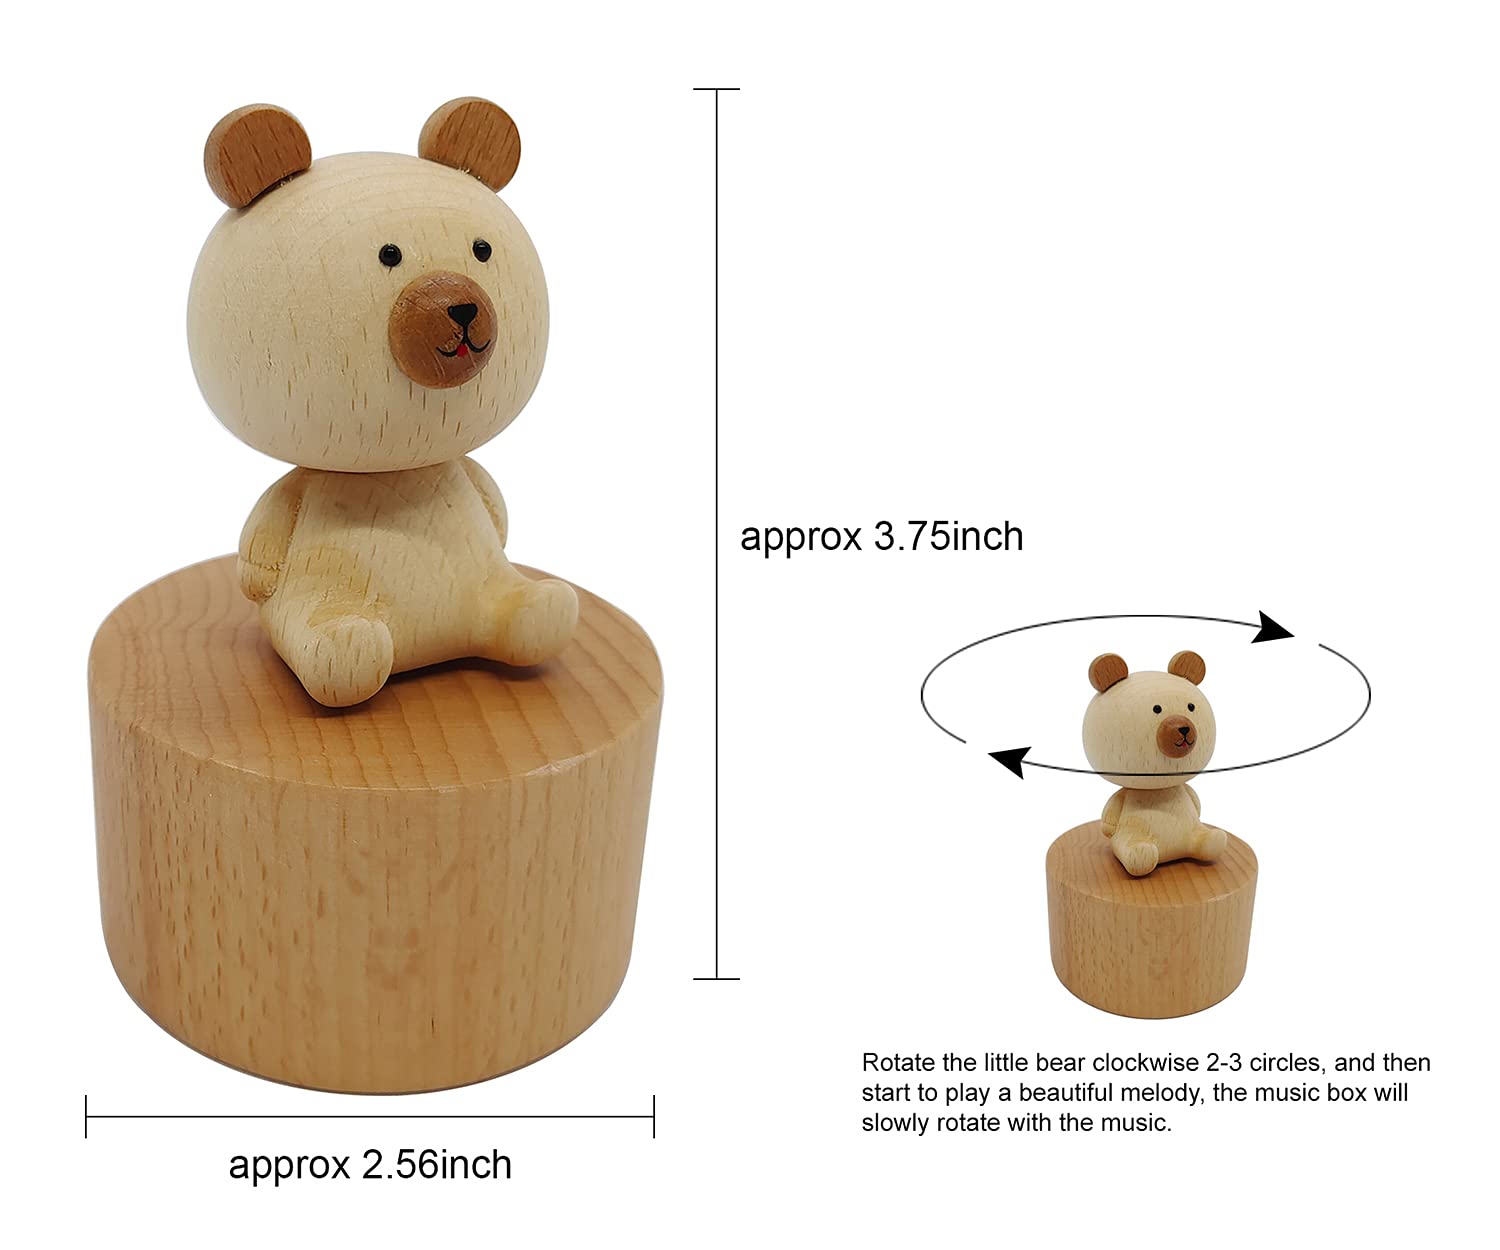 LILYXIN Cute Little Bear Mini Music Box, Little Animals Wooden Mechanical Music Box, The Music Box Gift That Sings Castle in The Sky, Best Gift for Boy Girl Friends Singing Music Gift Box